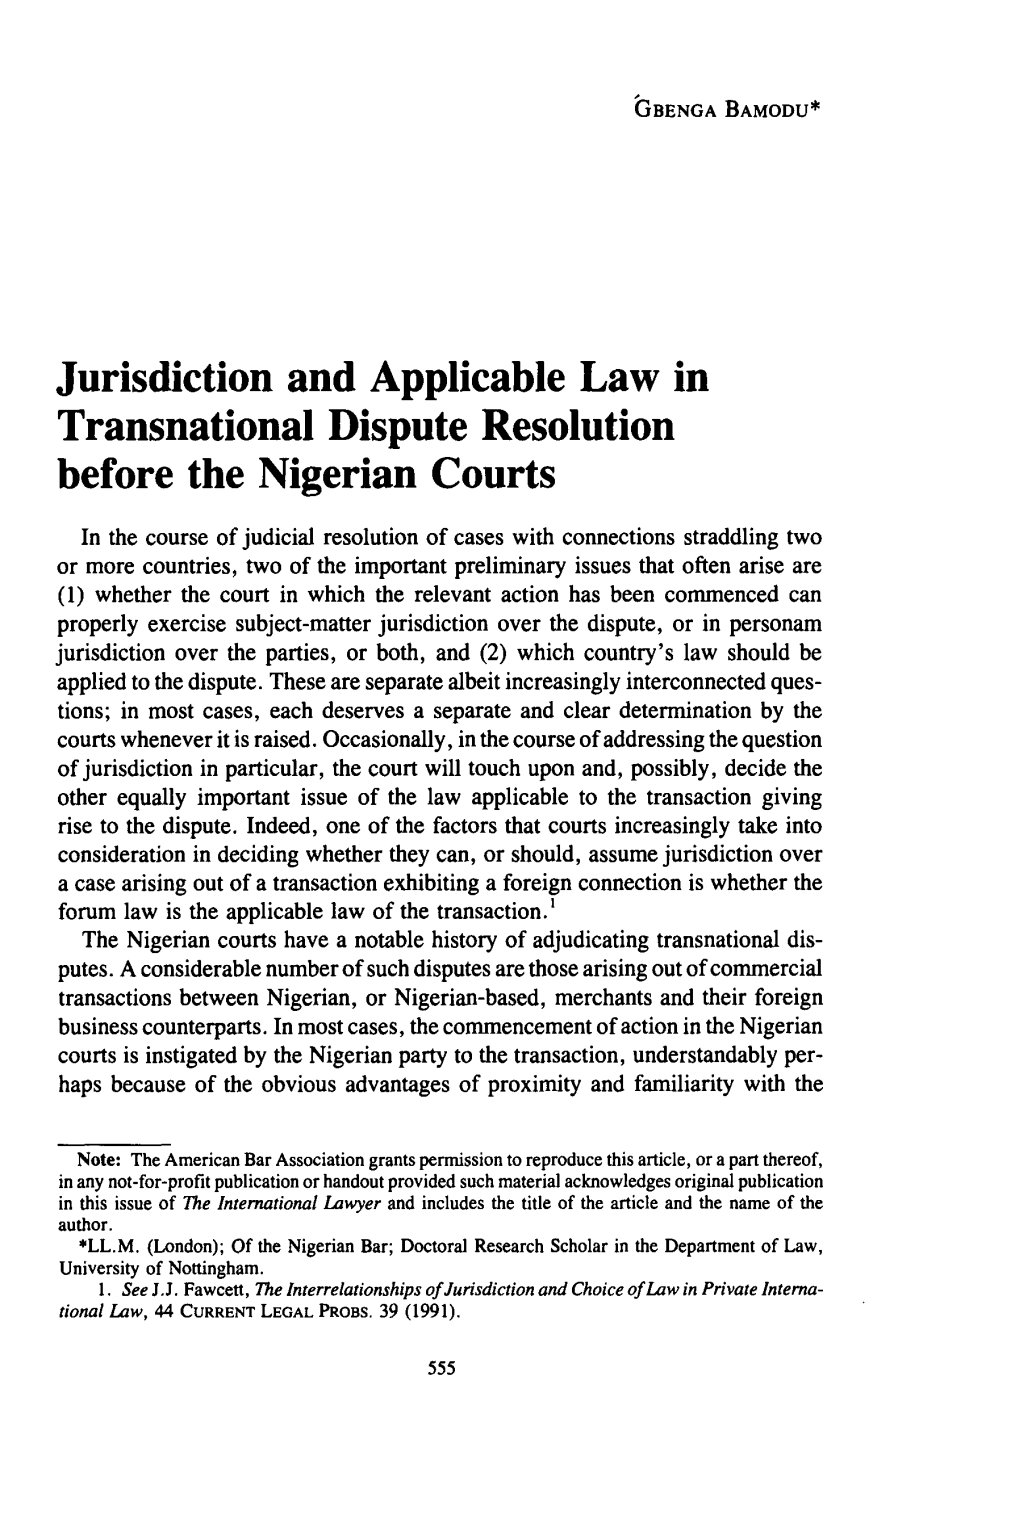 Jurisdiction and Applicable Law in Transnational Dispute Resolution Before the Nigerian Courts